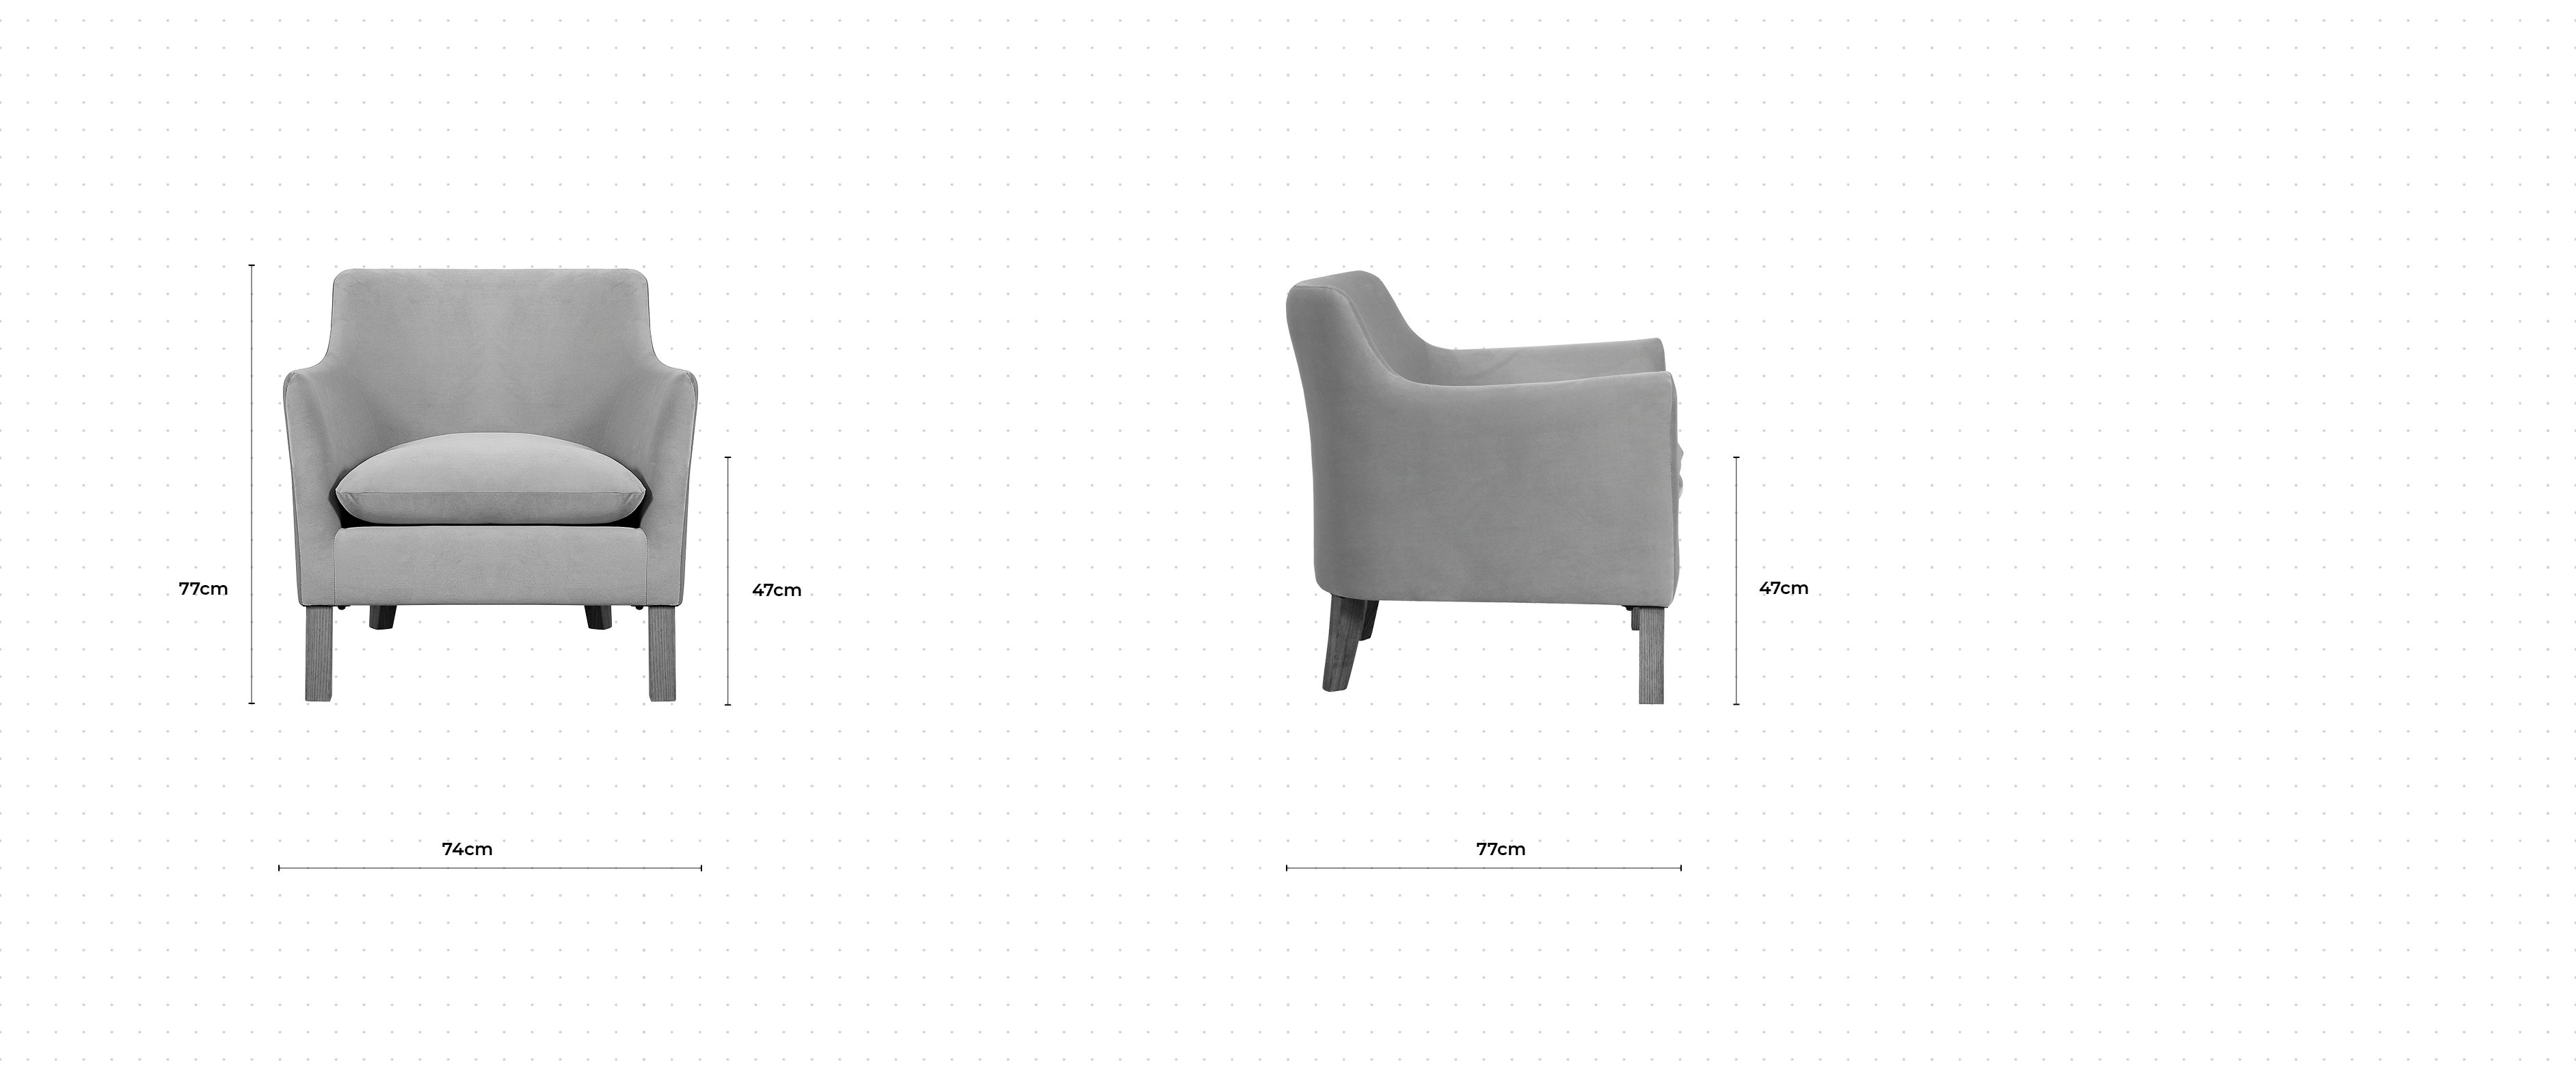 Harbour Loose Cover Armchair dimensions